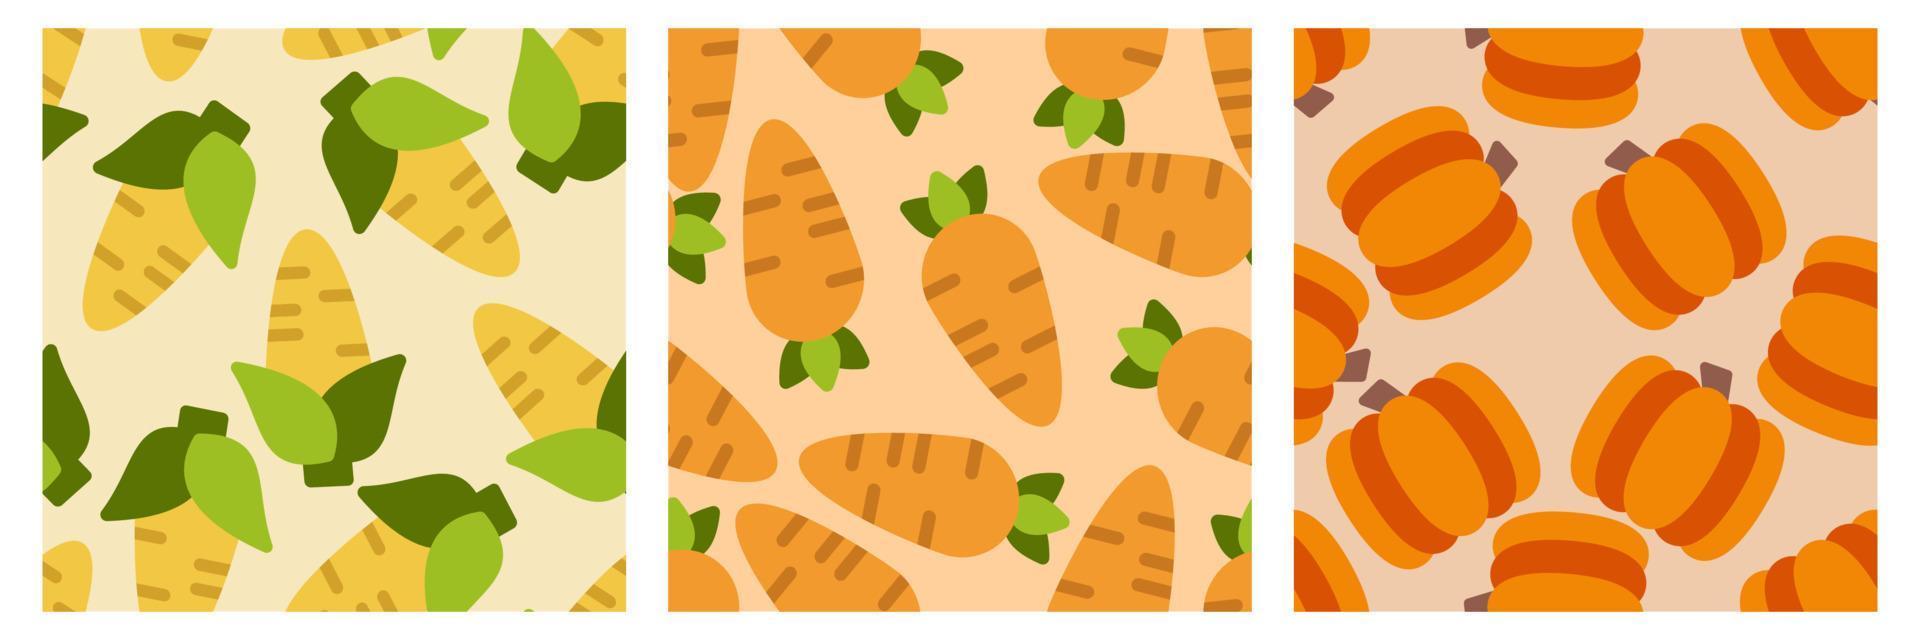 Vegetable seamless pattern set. Carrot, corn and pumpkin. Design elements for baby textile or clothes. Food print for curtain. Vector illustration